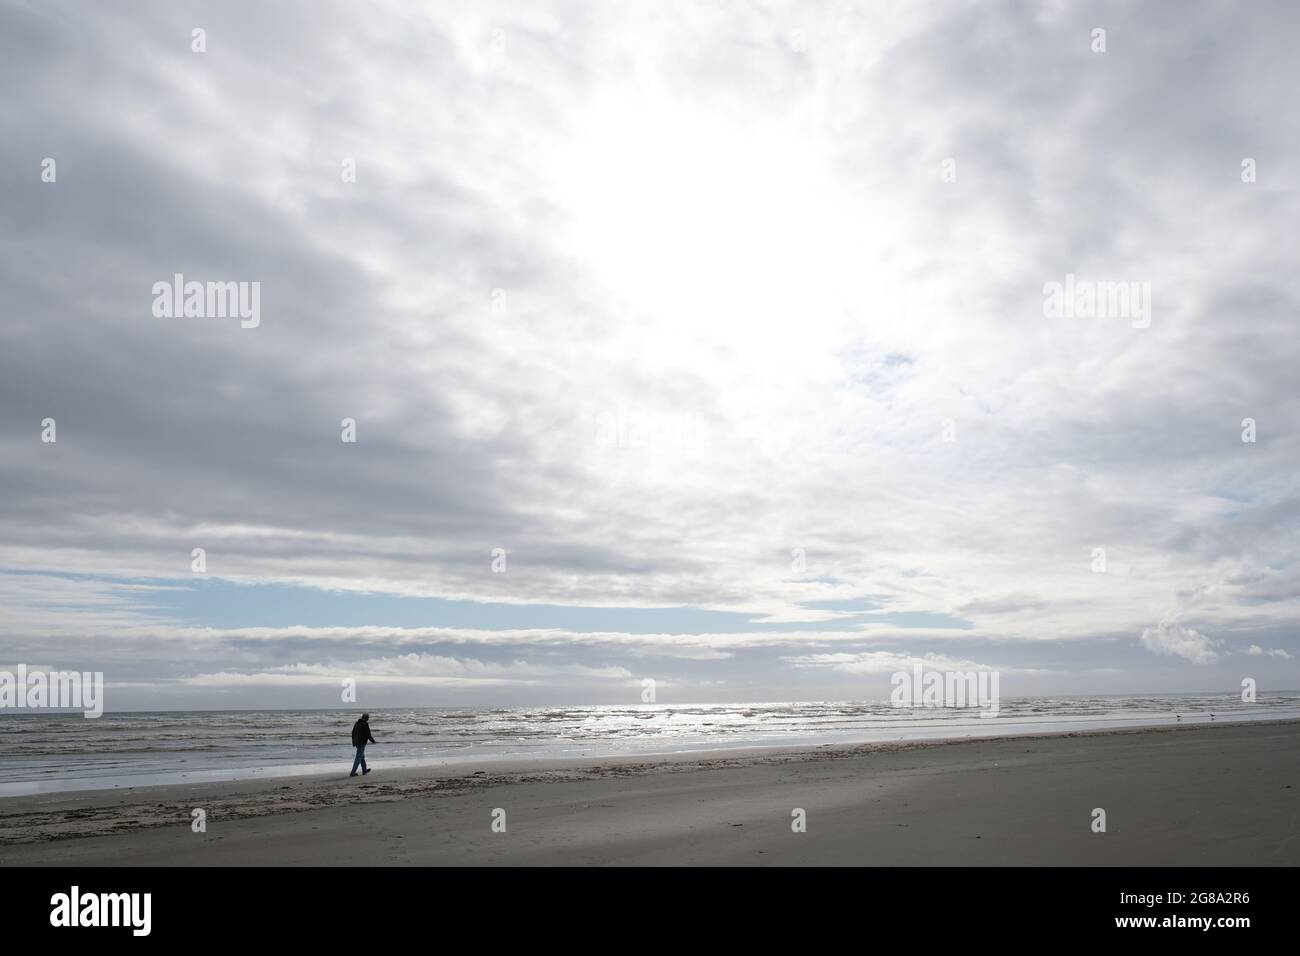 Moody image of walkers silhouetted on the beach next to the Pacific Ocean, Pacific Beach, Washington State USA. Stock Photo